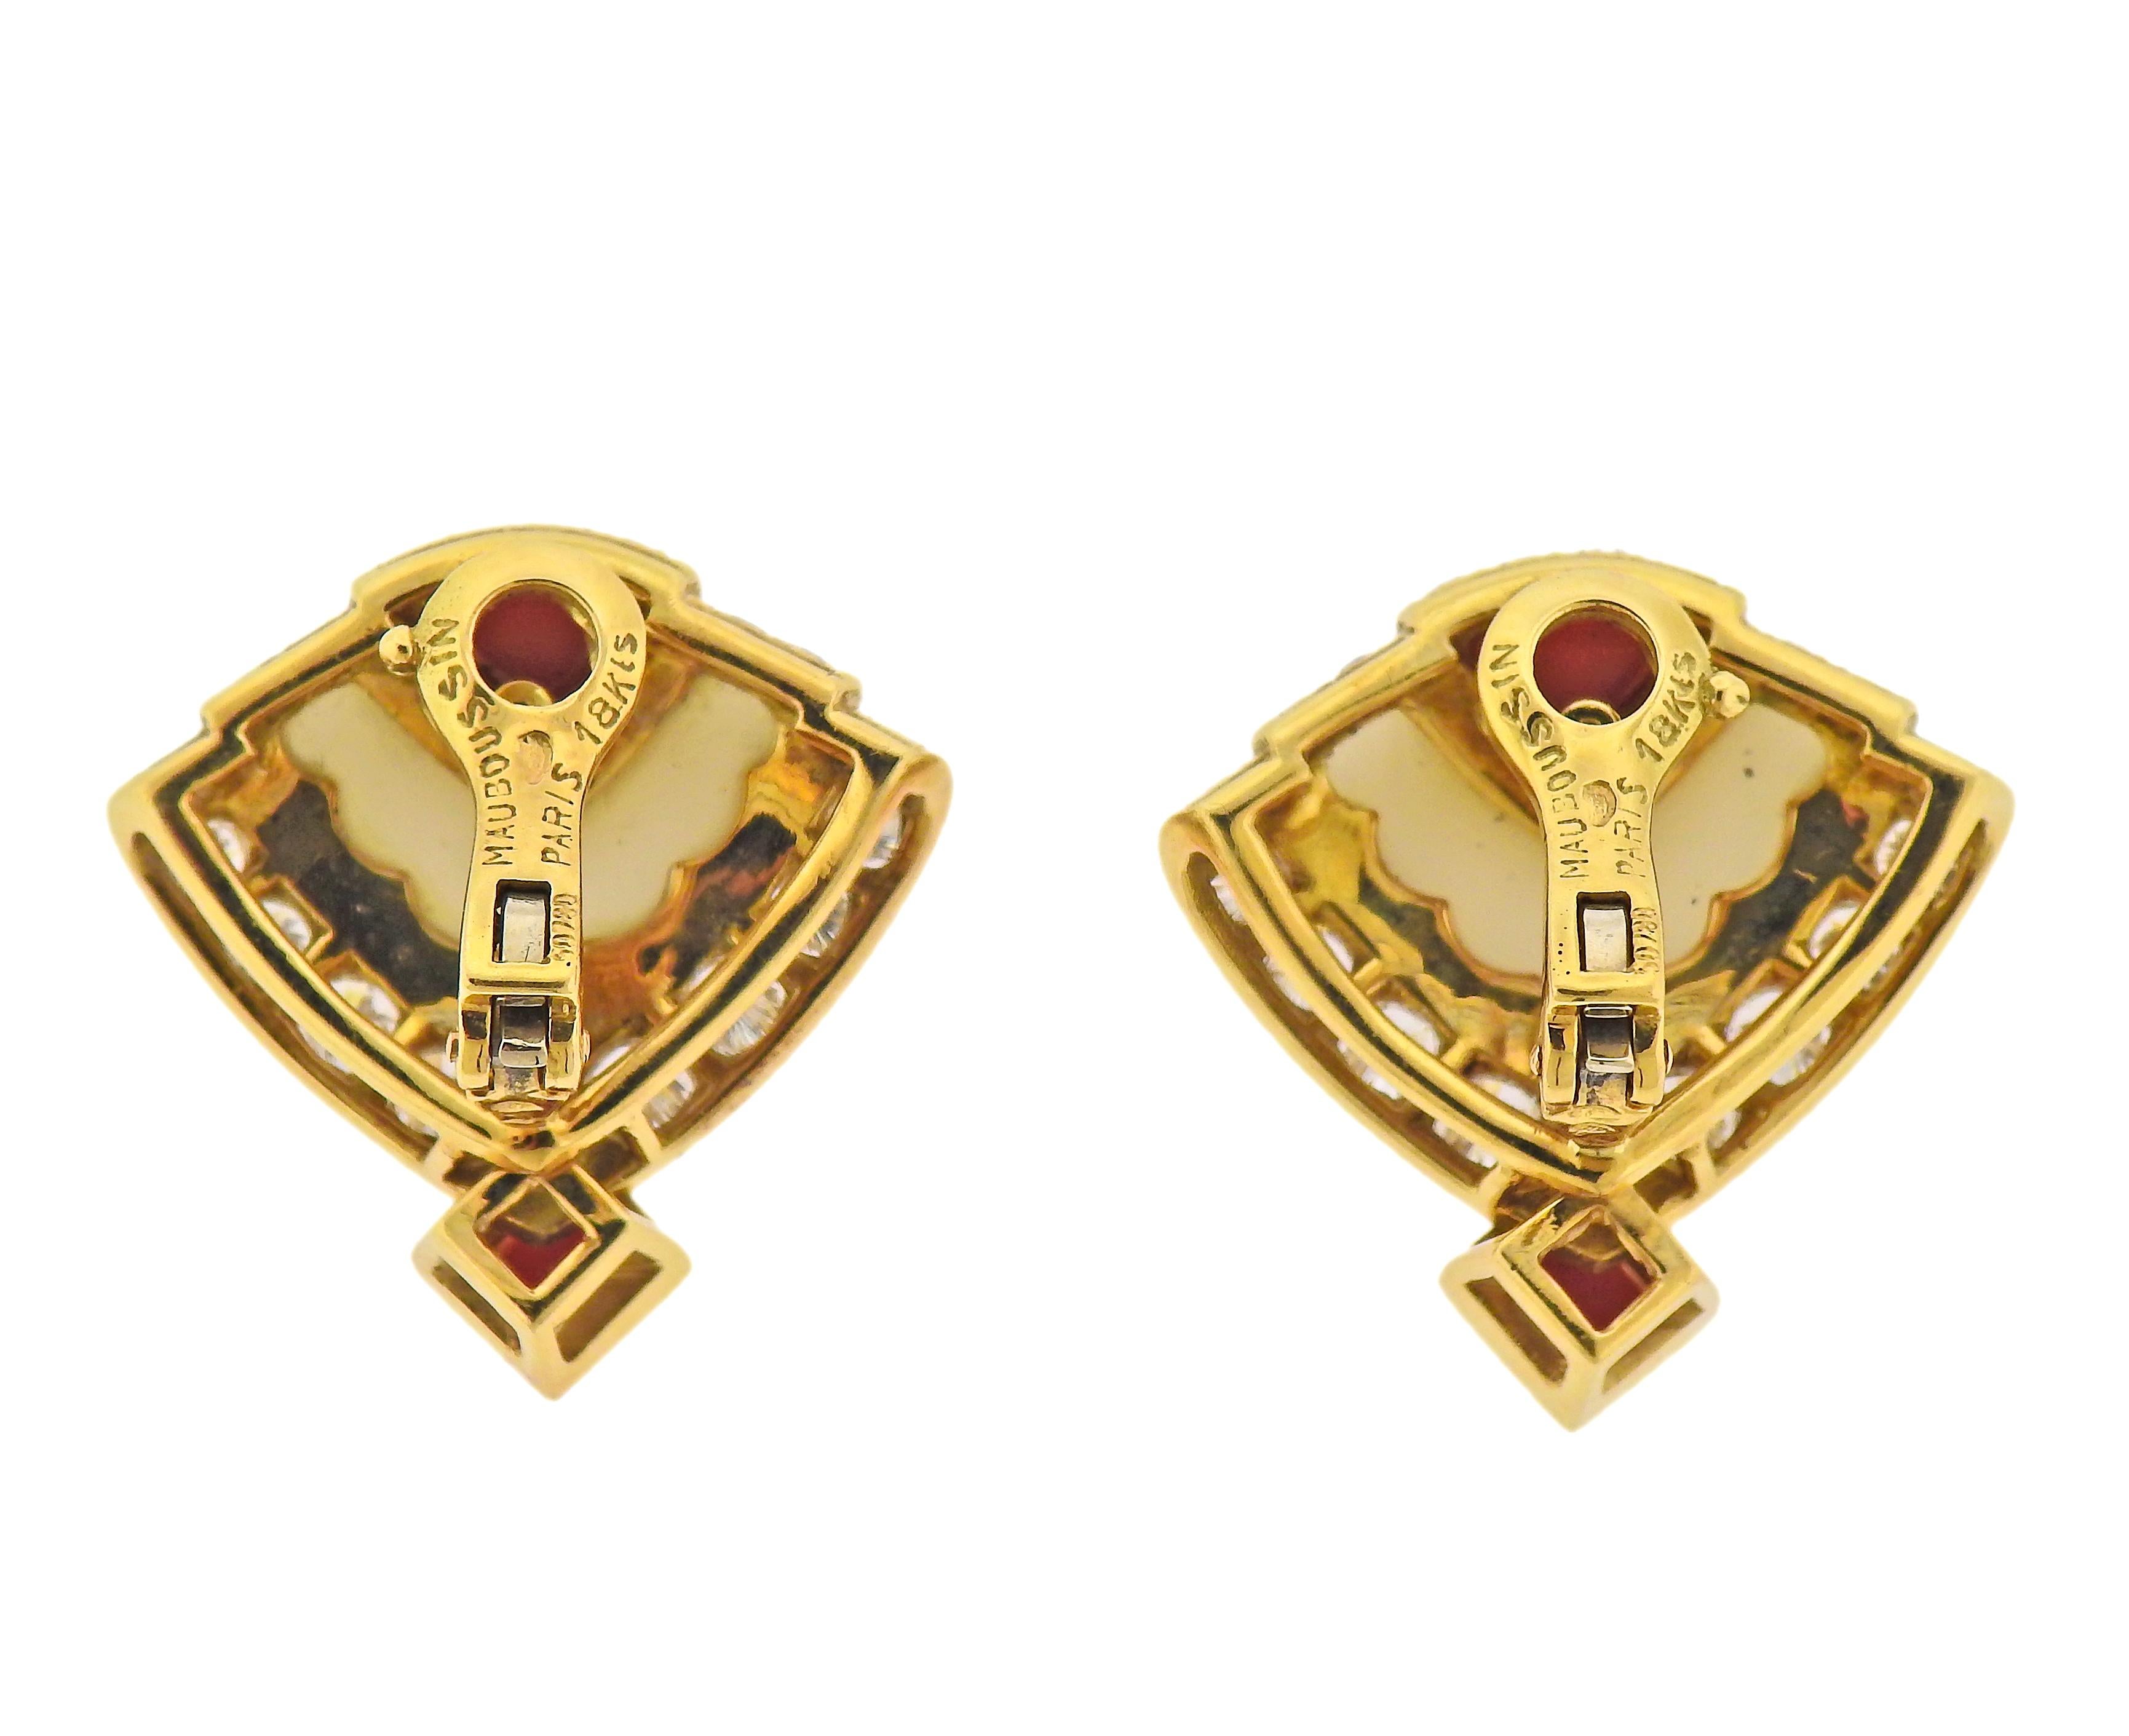 Pair of 18k gold earrings by Mauboussin Paris, with carved coral and approx. 2.00ctw in diamonds. Earrings are 24mm x 23mm. Marked: Mauboussin Paris, 18k. Weight - 17.6 grams. 